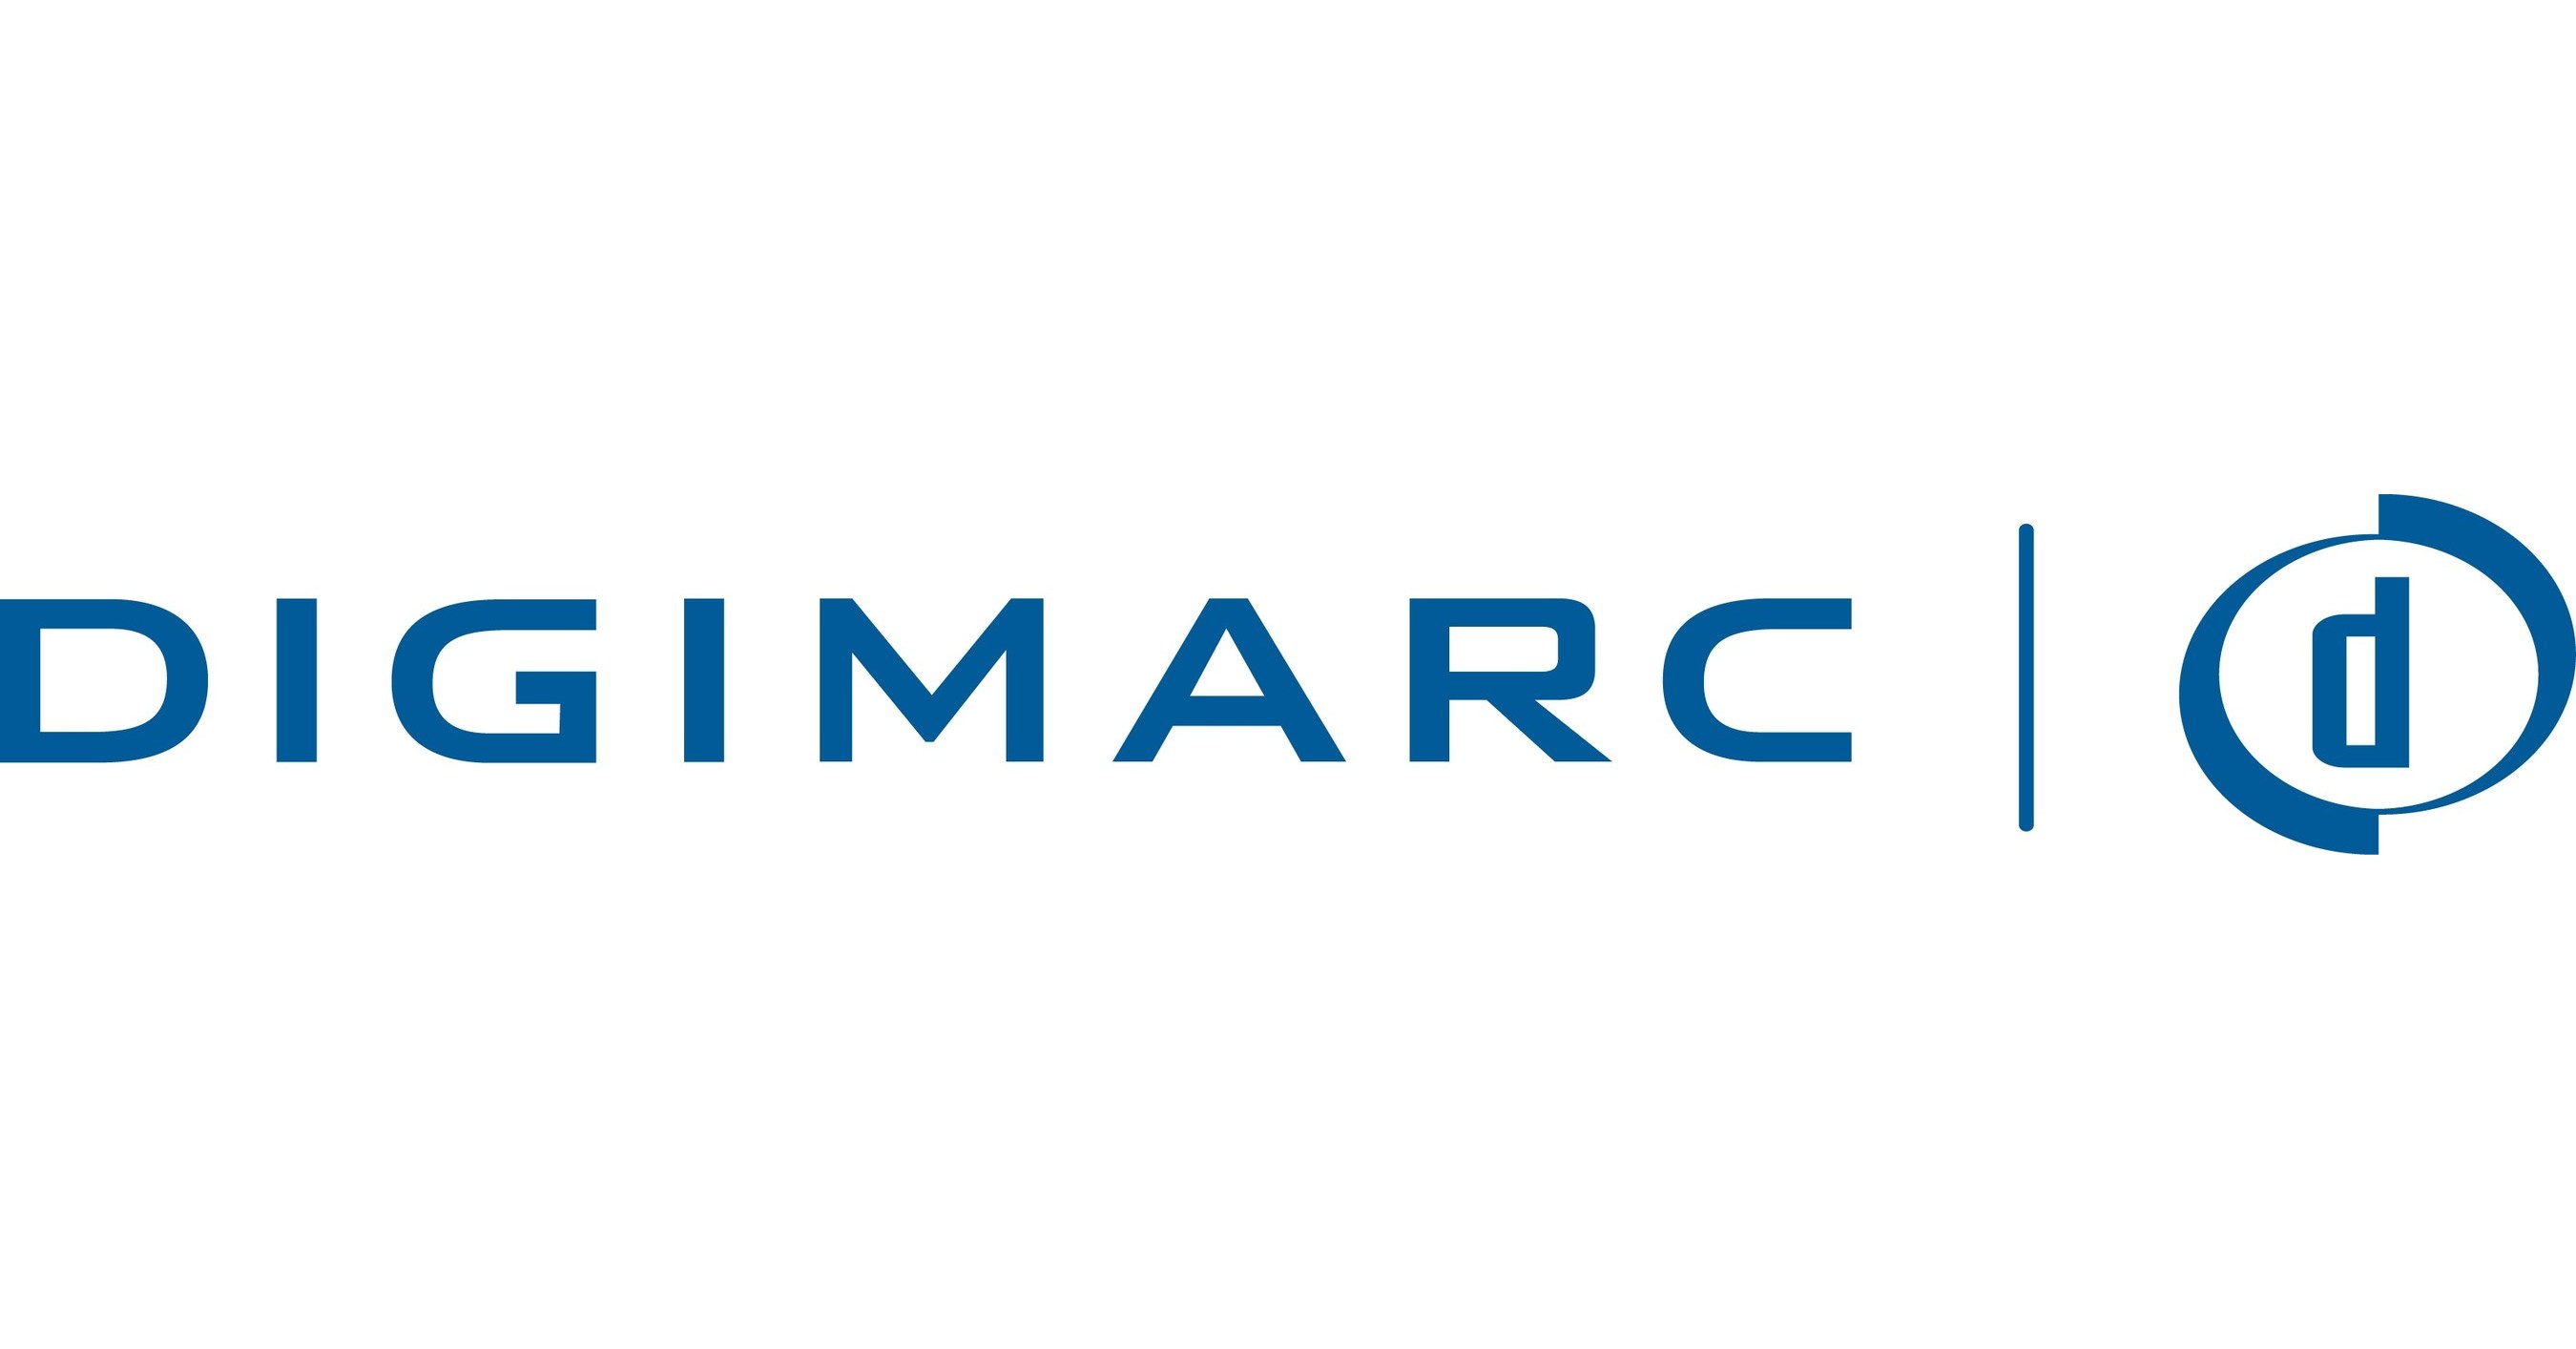 Digimarc Expands Partnership with Walmart in a New Multiyear Agreement